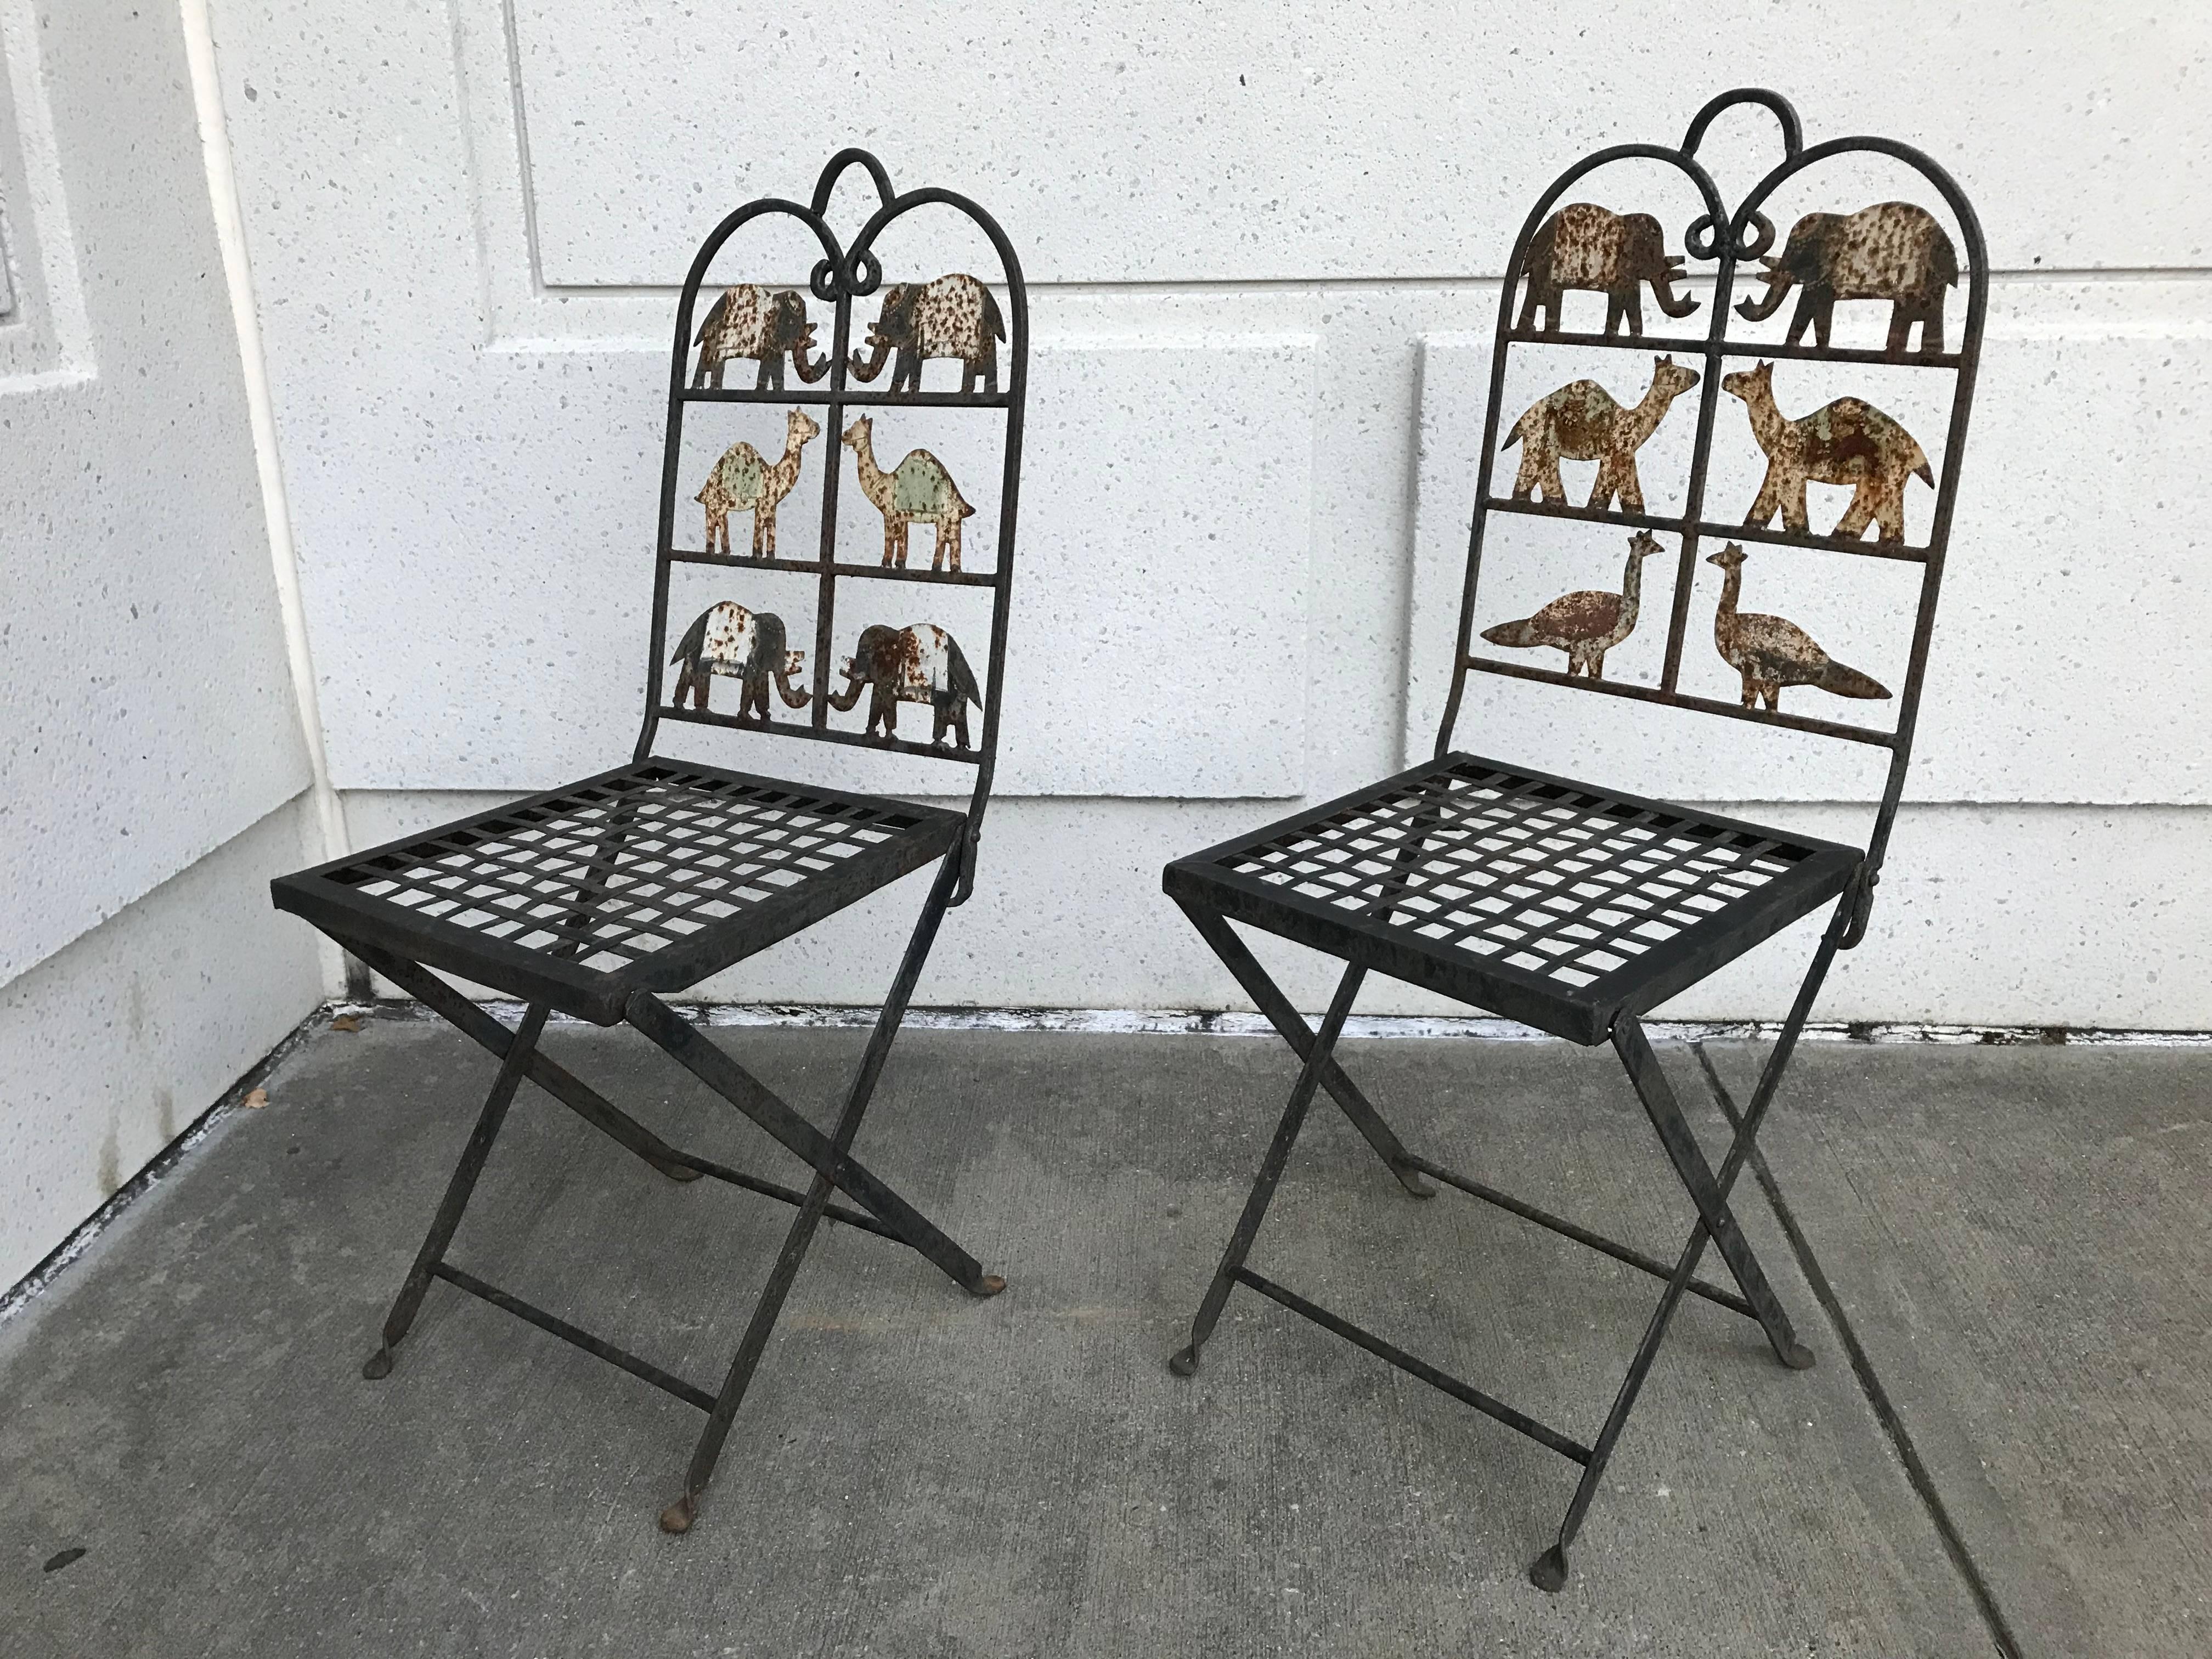 A whimsical pair of wrought iron folding garden chairs with painted animal cutouts, including elephants, camels and peacocks. These chairs are utterly charming, the weathering of the surface only adding to their appeal. They do fold and are suitable